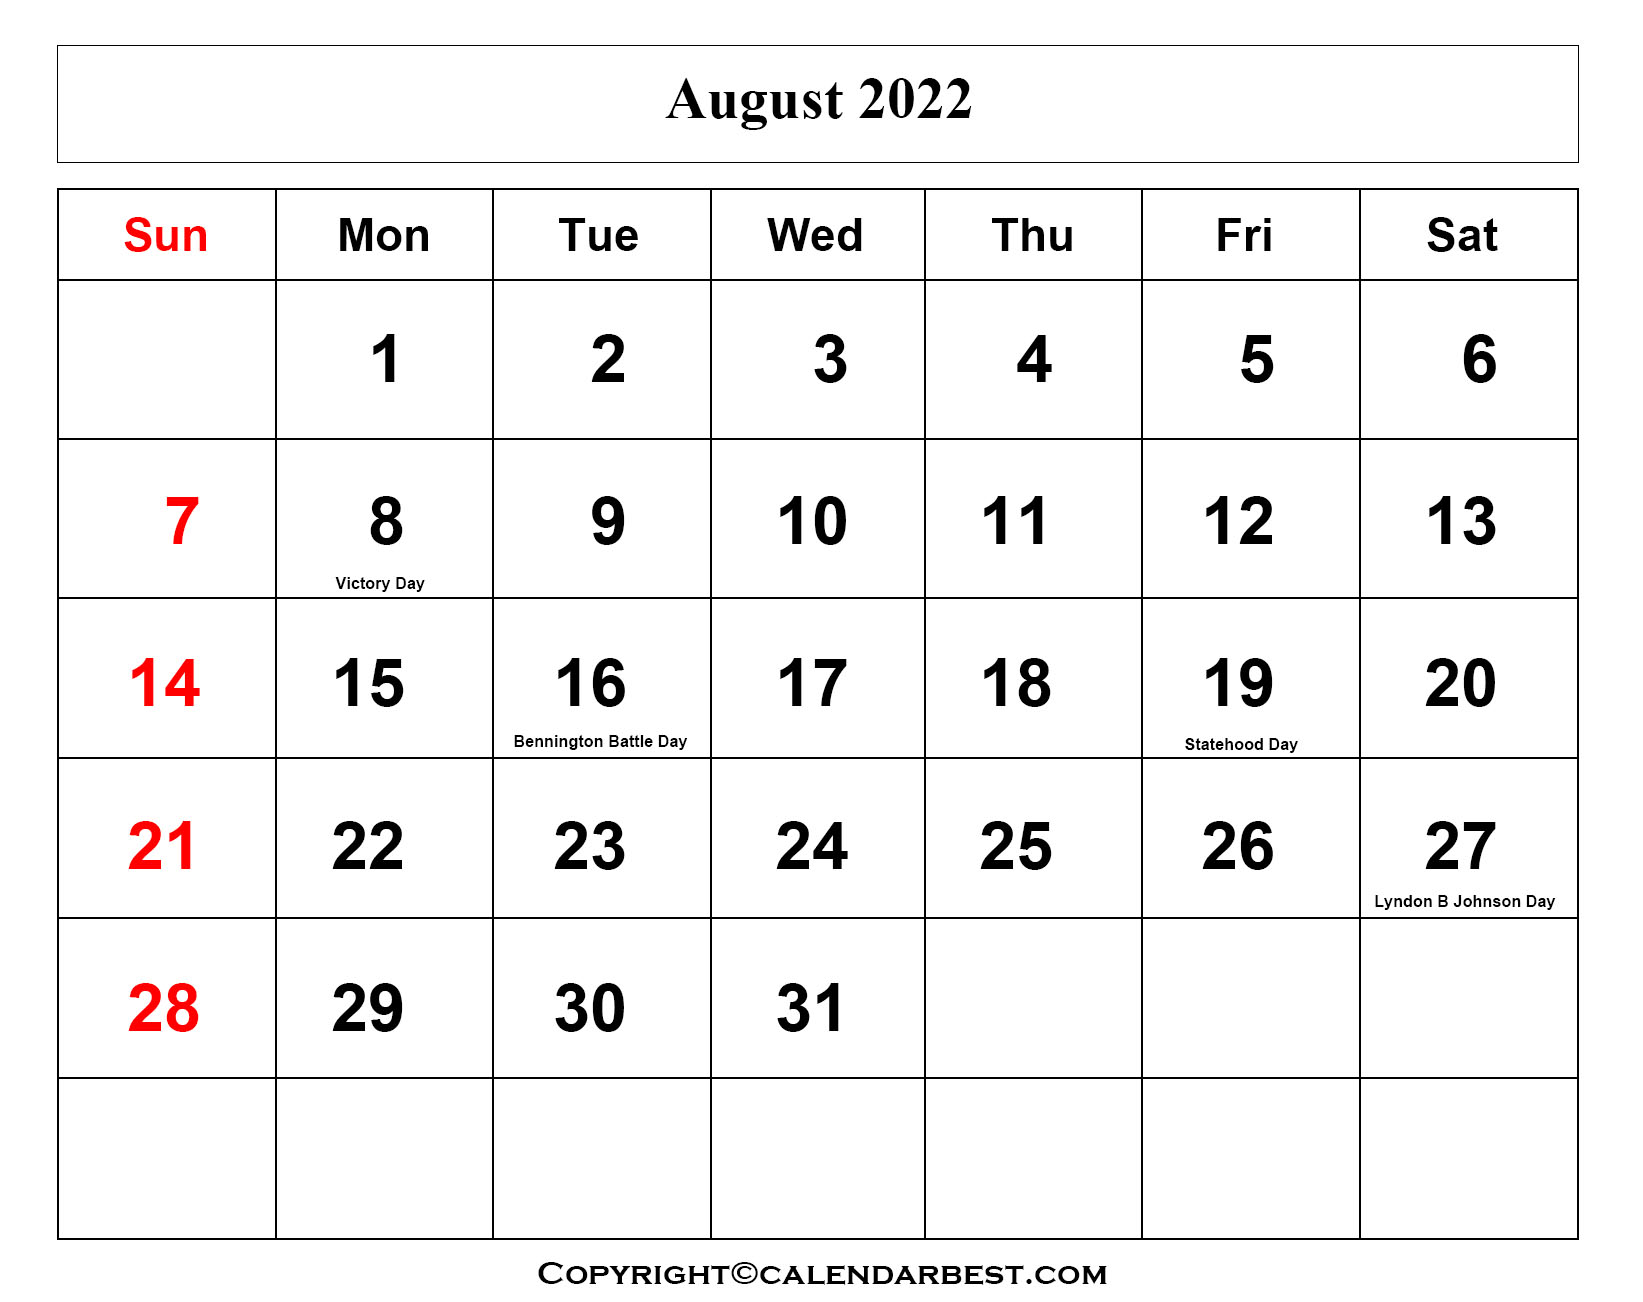 Free Printable August calendar 2022 with holidays